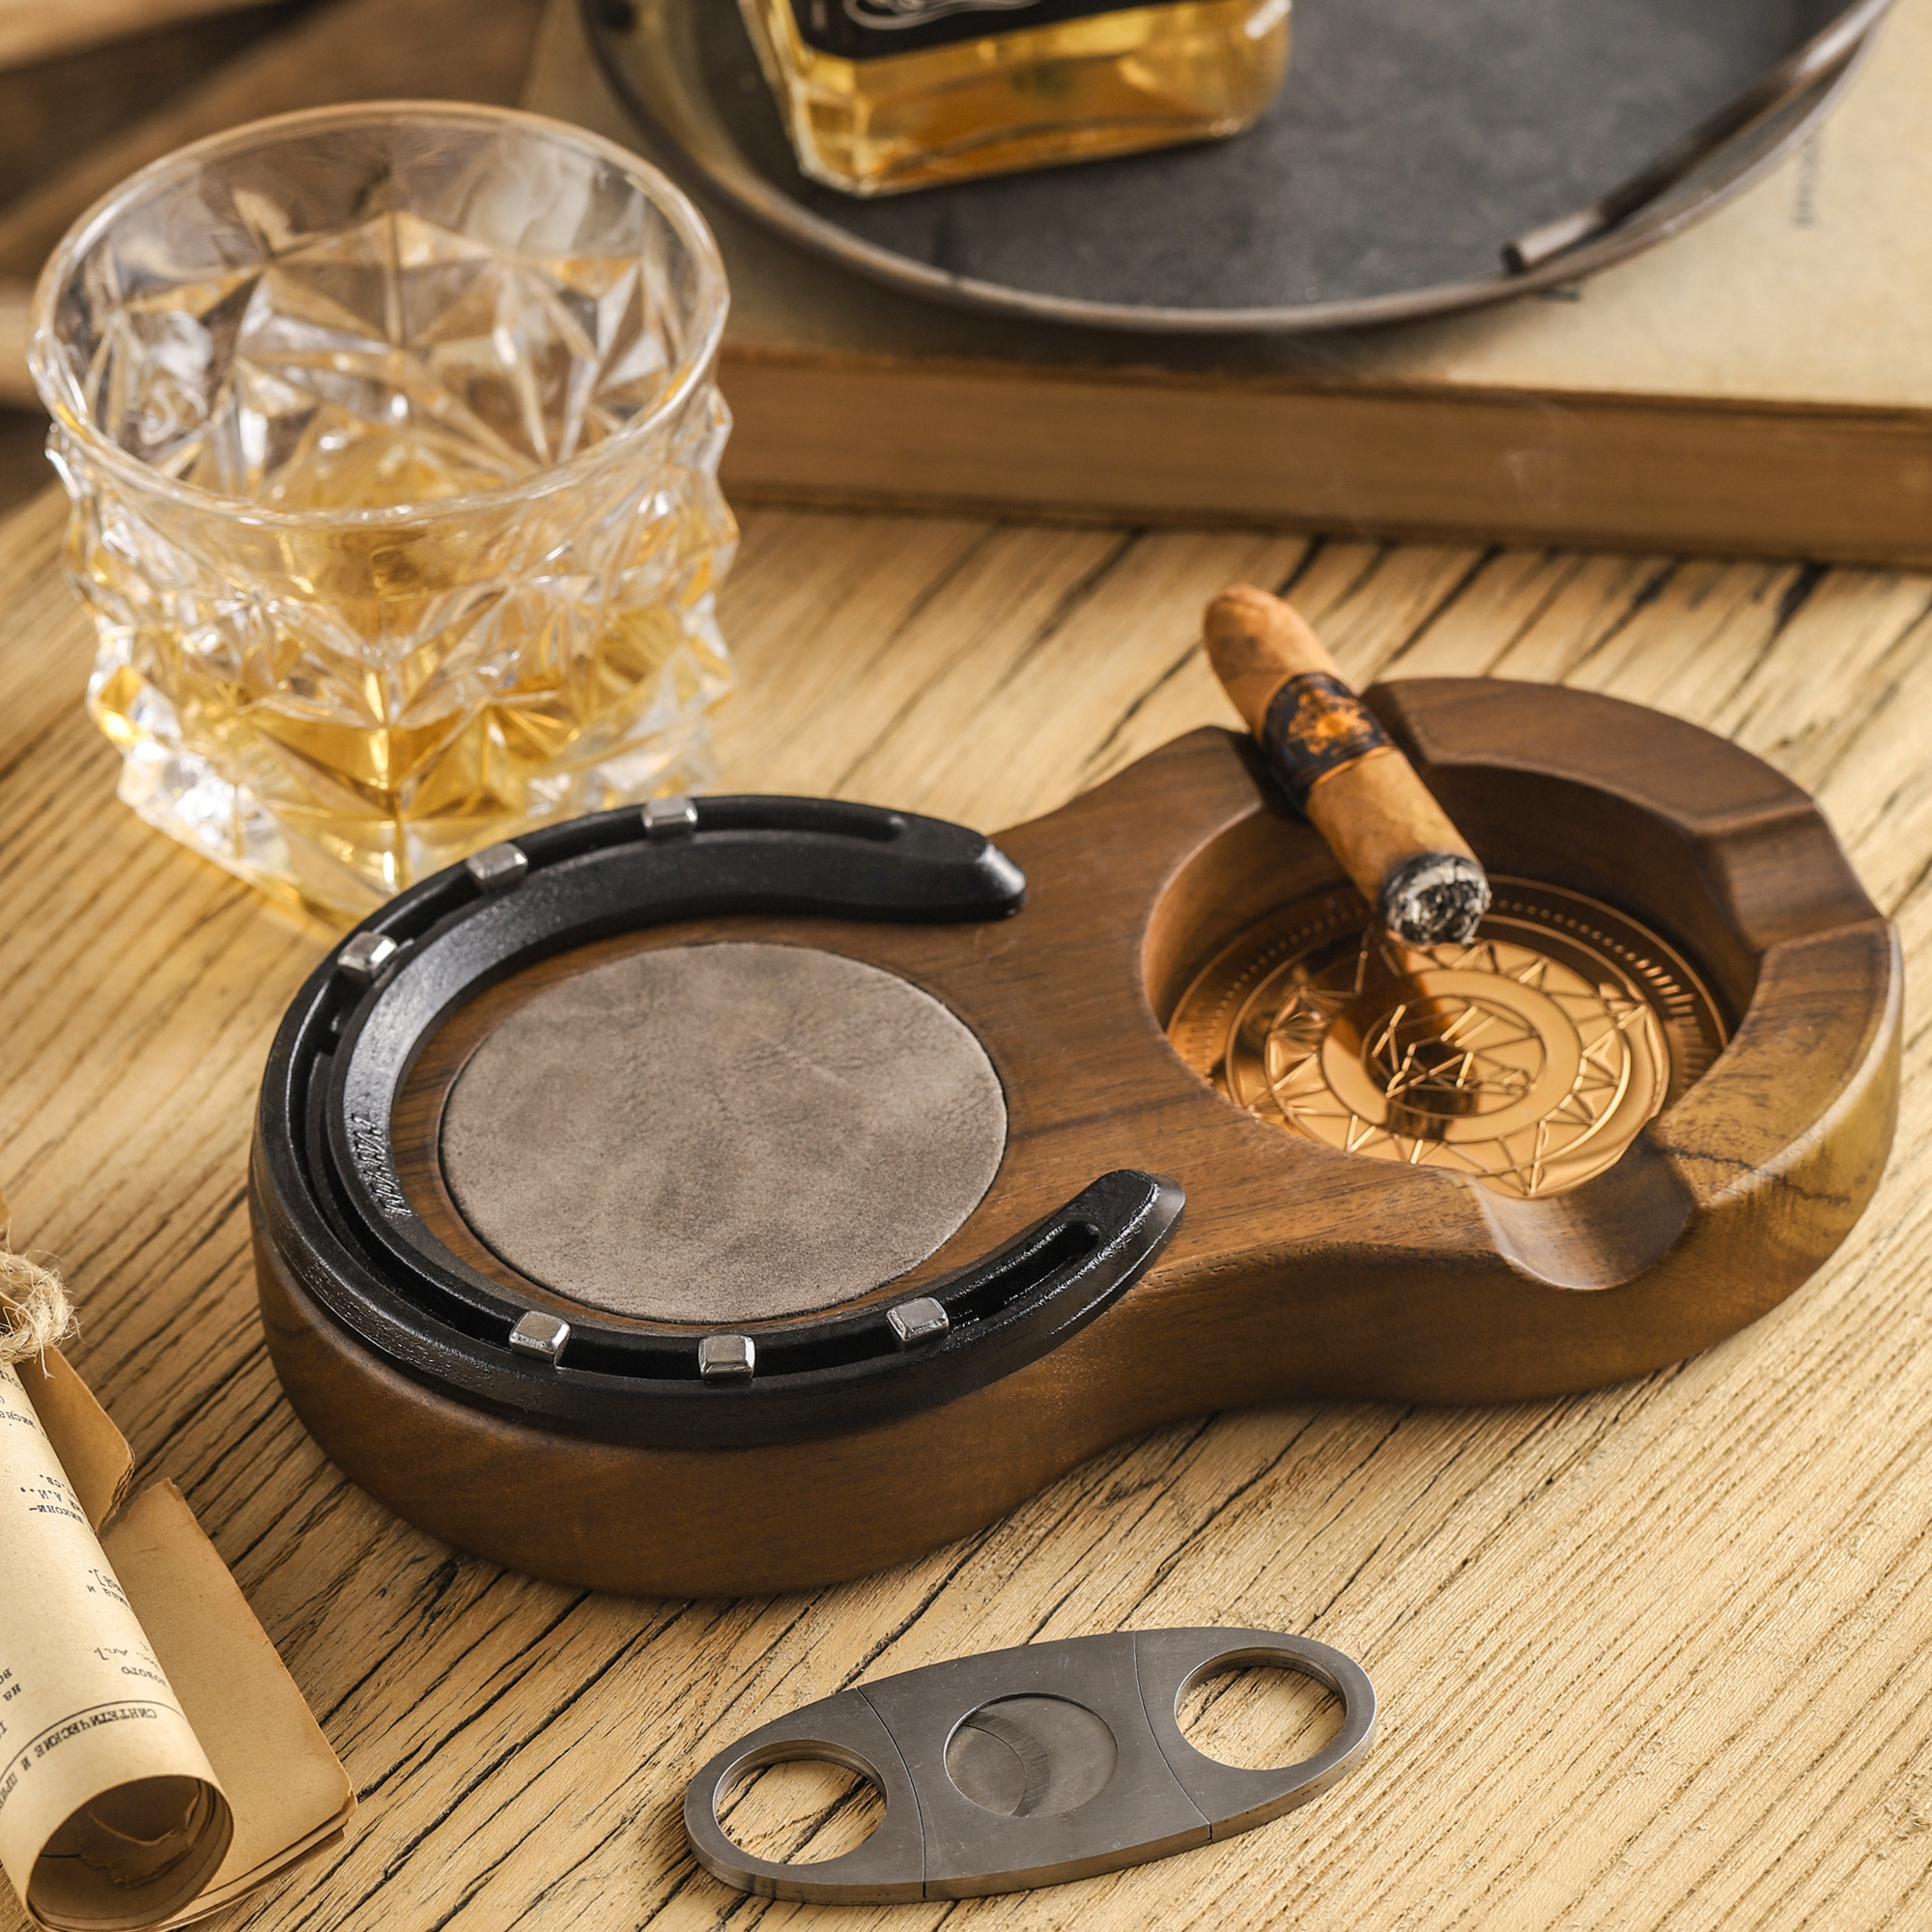 1pc wooden cigar ashtray handmade horseshoe design cigar accessories with 3 cigar slot portable travel cigar gifts for men indoor outdoor patio home office use details 6